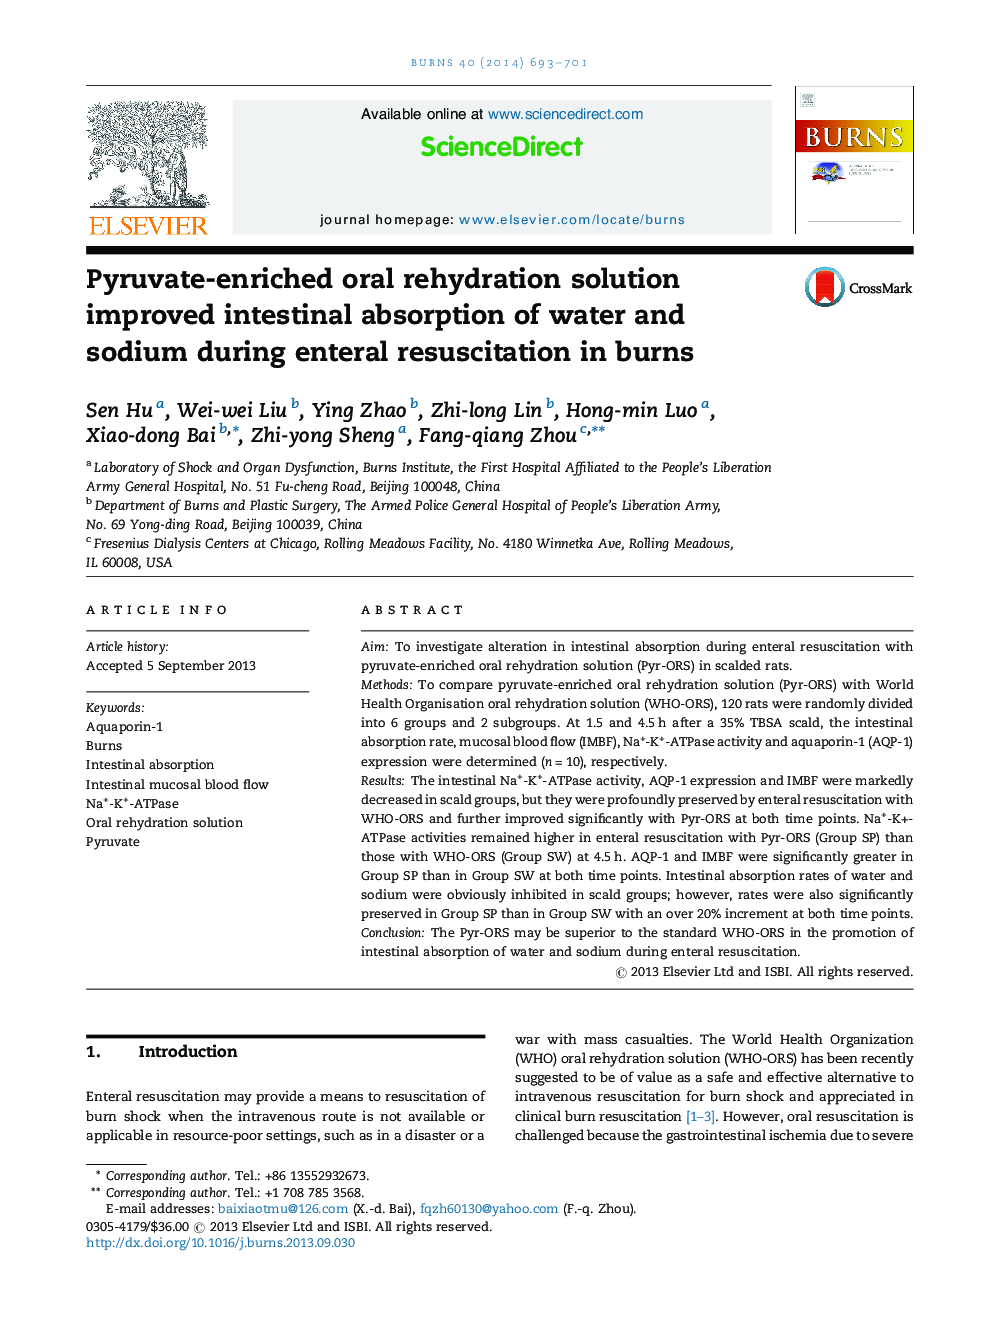 Pyruvate-enriched oral rehydration solution improved intestinal absorption of water and sodium during enteral resuscitation in burns